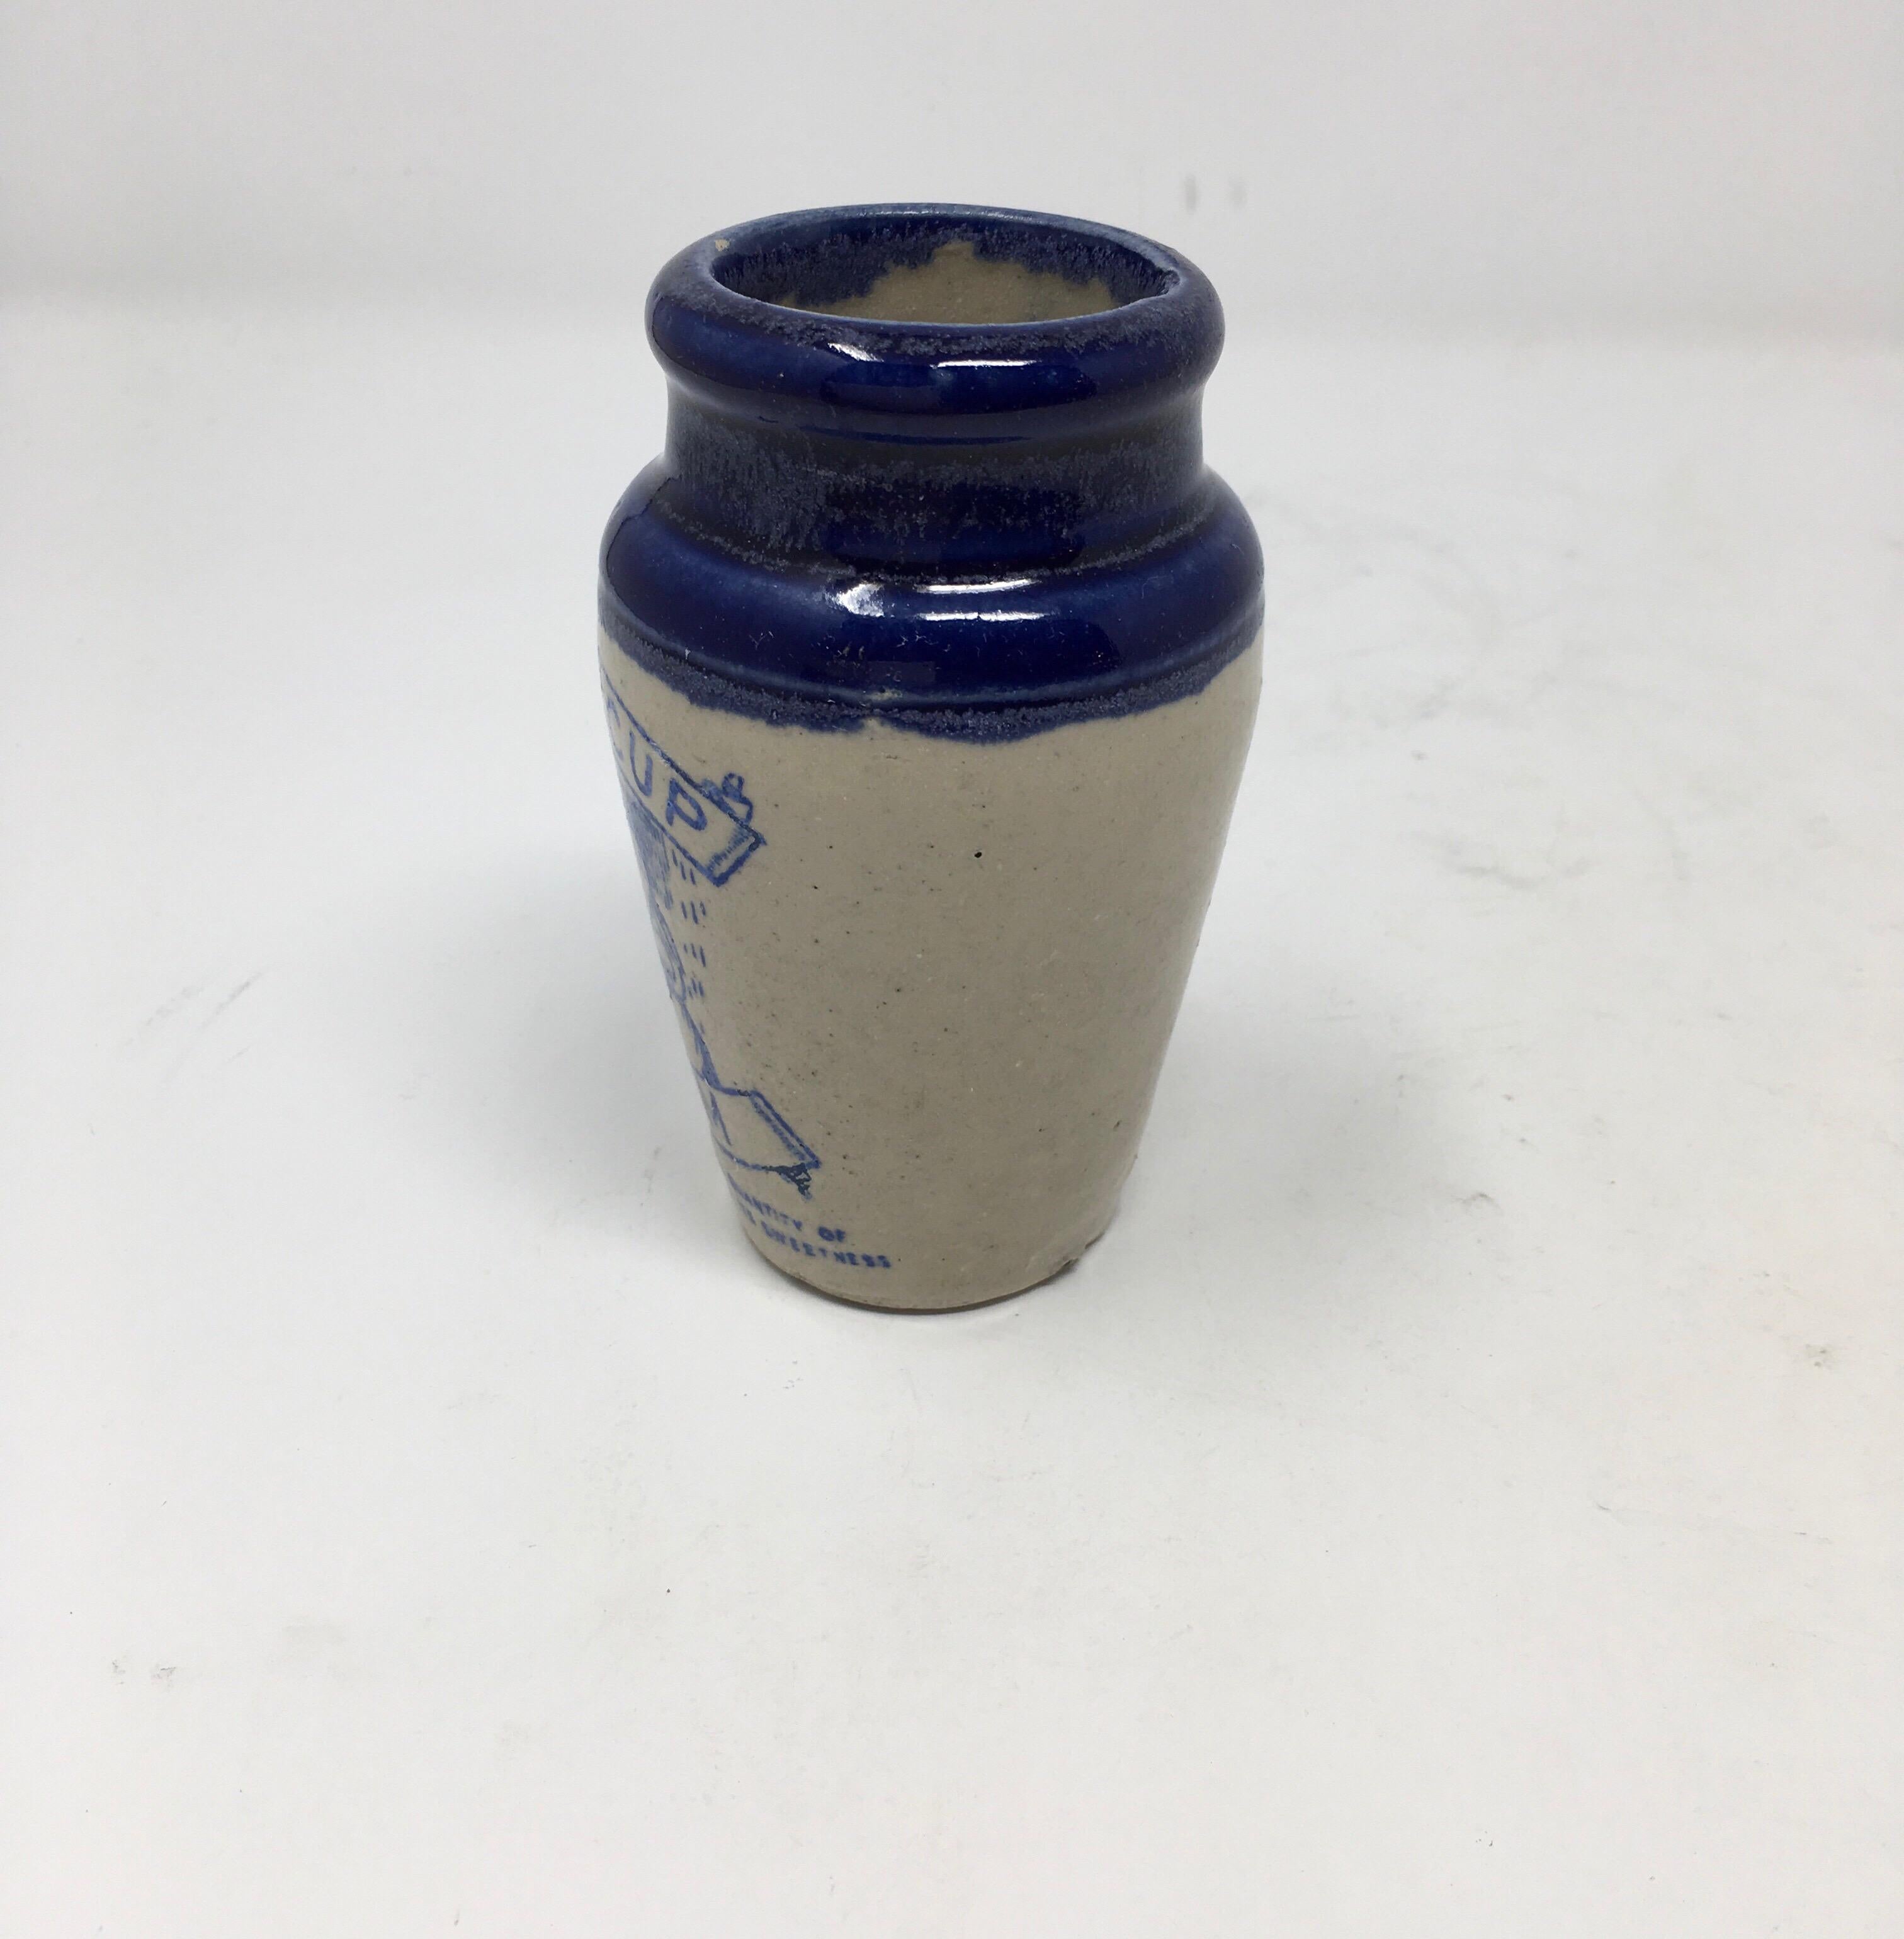 Found in England, this Scottish stoneware buttercup cream advertising pot has a beautiful cobalt blue top, cobalt transfer print and a pictorial of a milk maid and cow. The pot measures approx. 4.25 inches high and is in good condition.